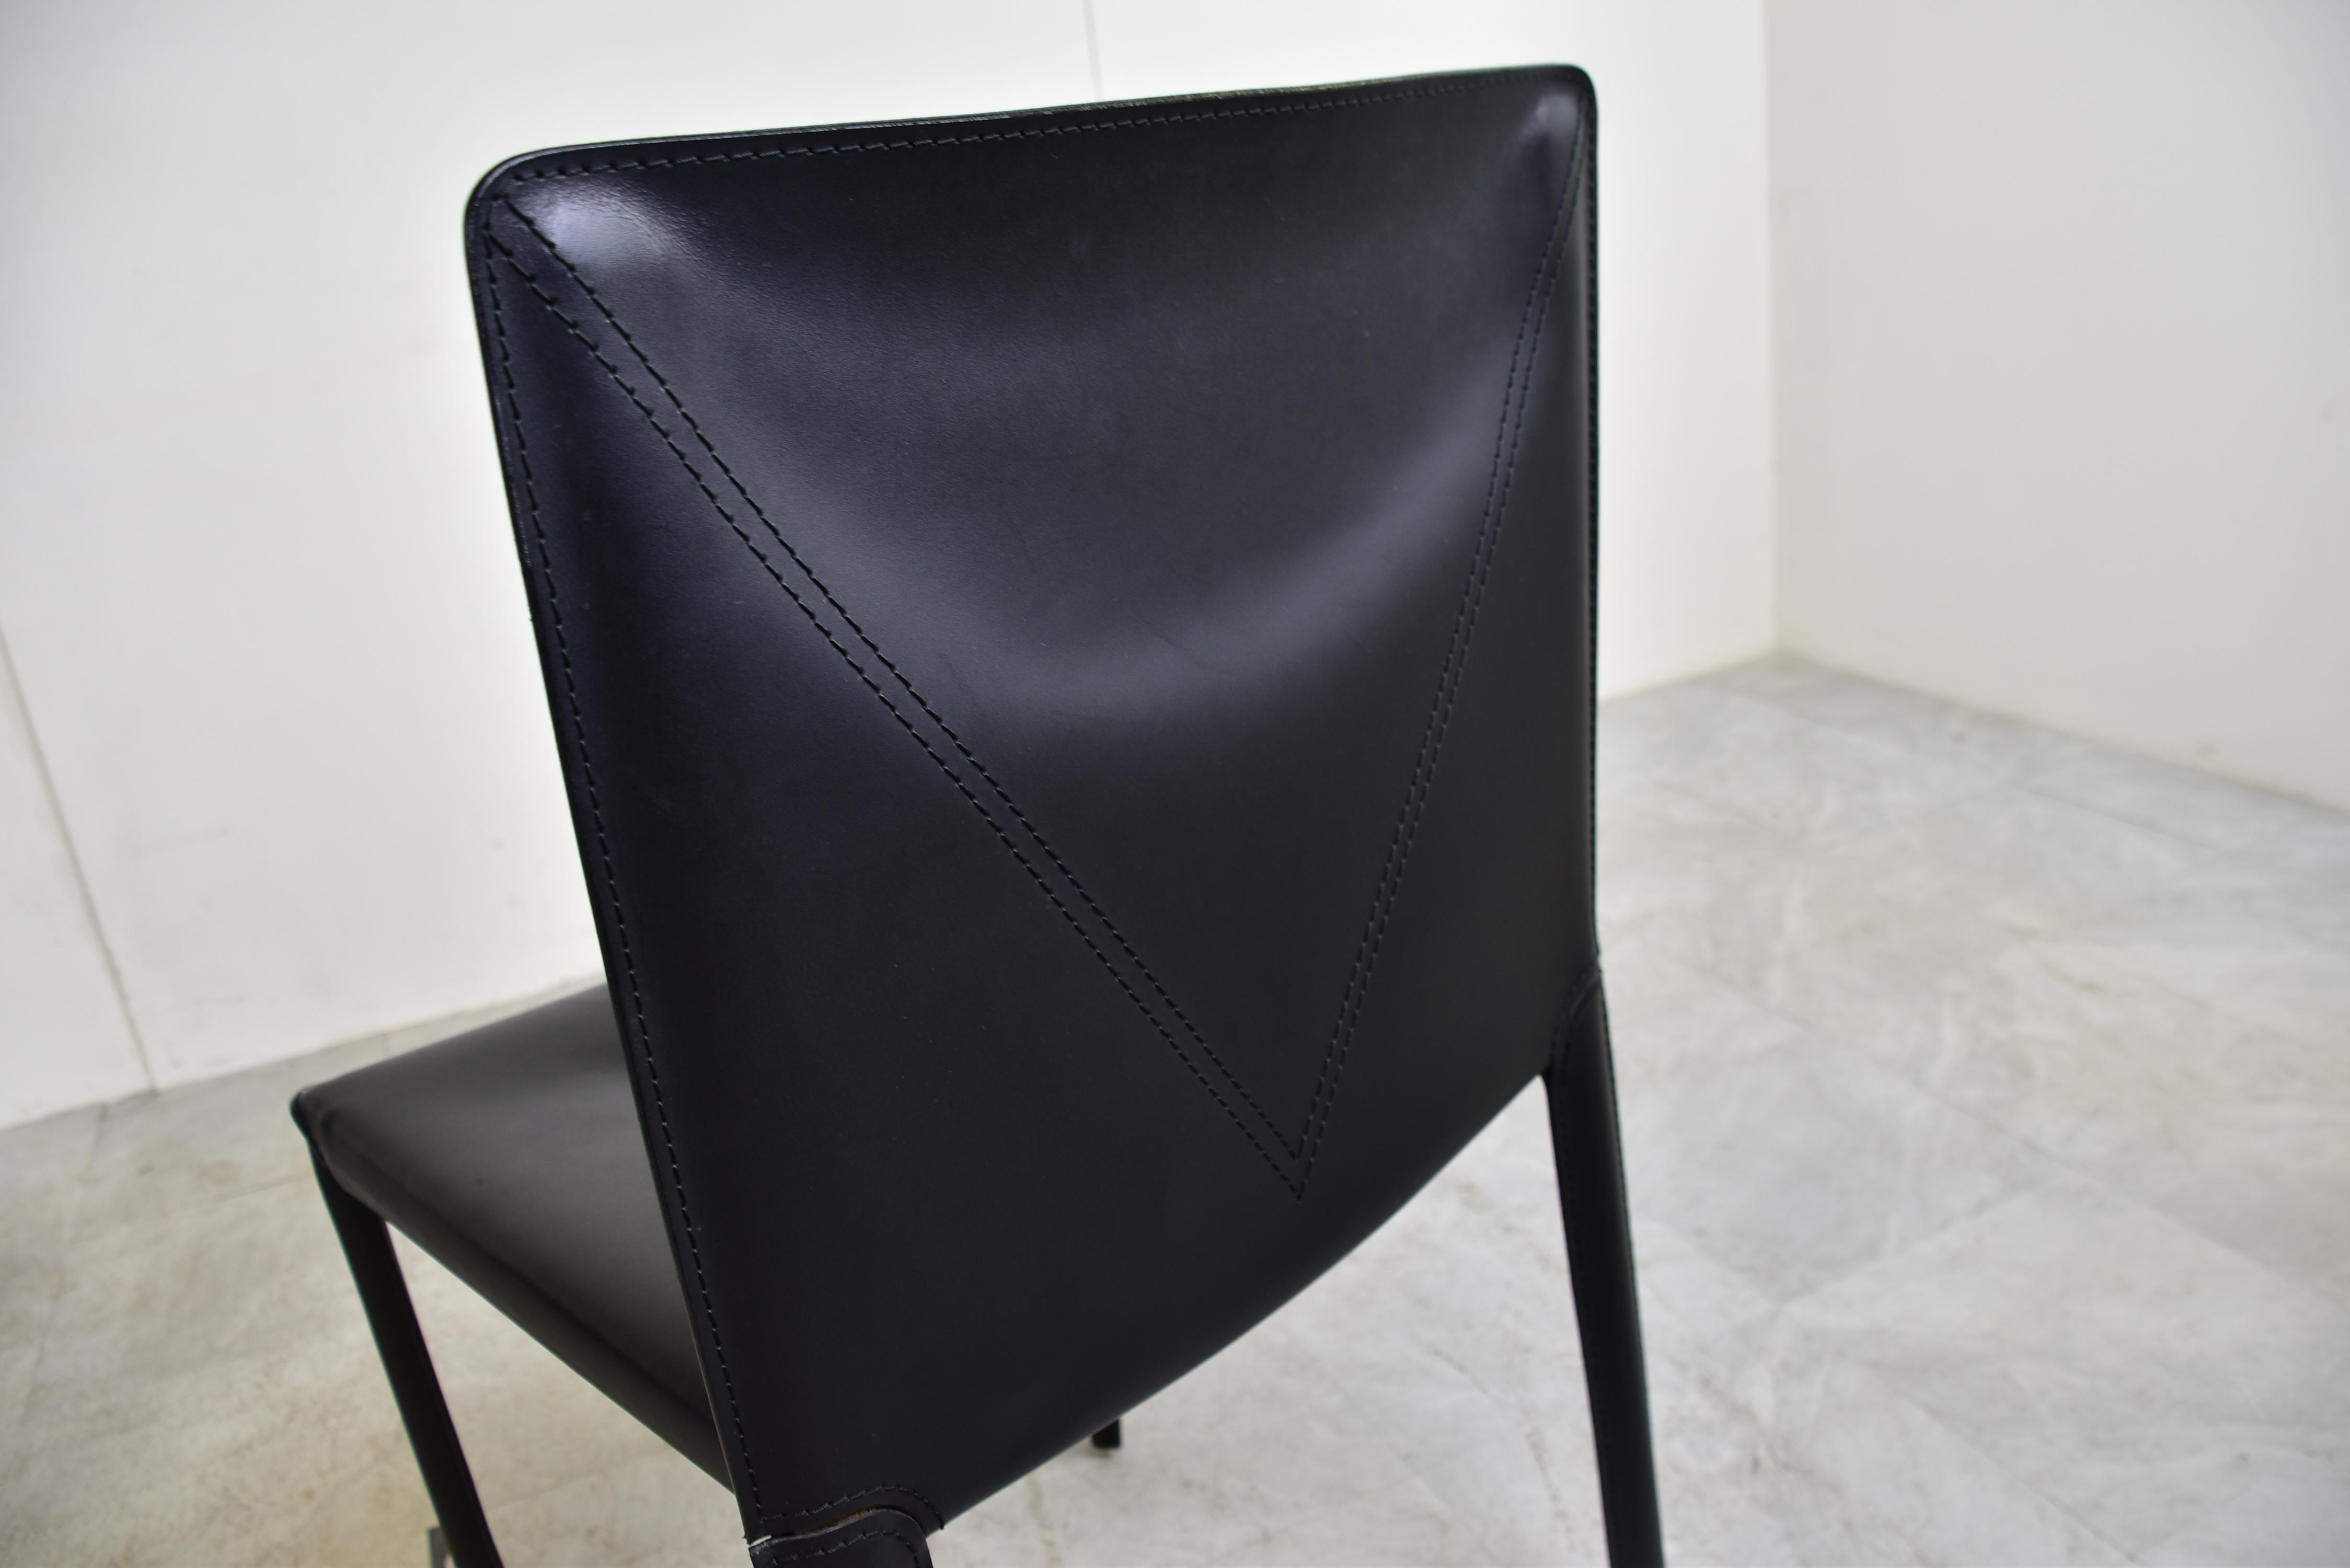 Vintage black leather upholstered dining chairs by Cattelan italy.

Comfortable dining chairs with nicely stiched leather.

Good overal condition

1980s - Italy

Dimensions
Height: 83cm/32.67